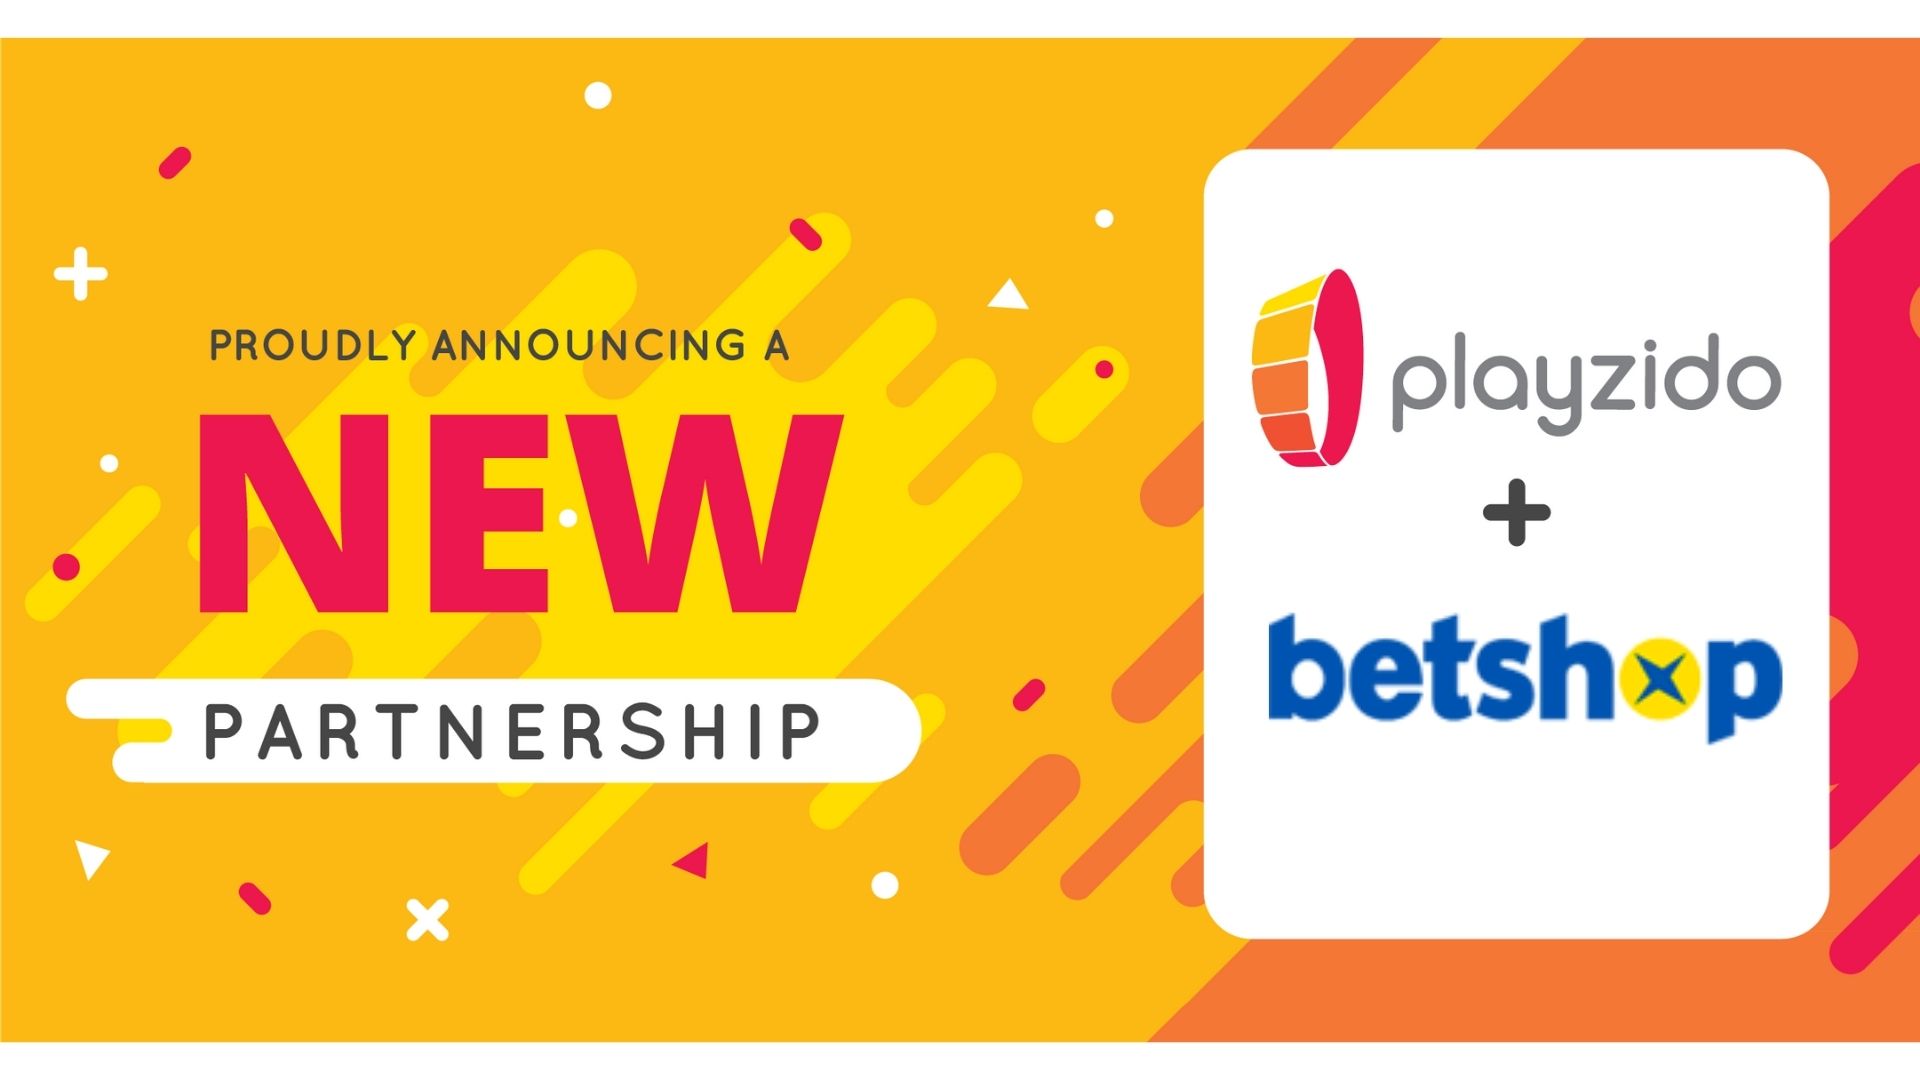 Playzido celebrate their 4th operator launch in as many weeks, with Betshop.